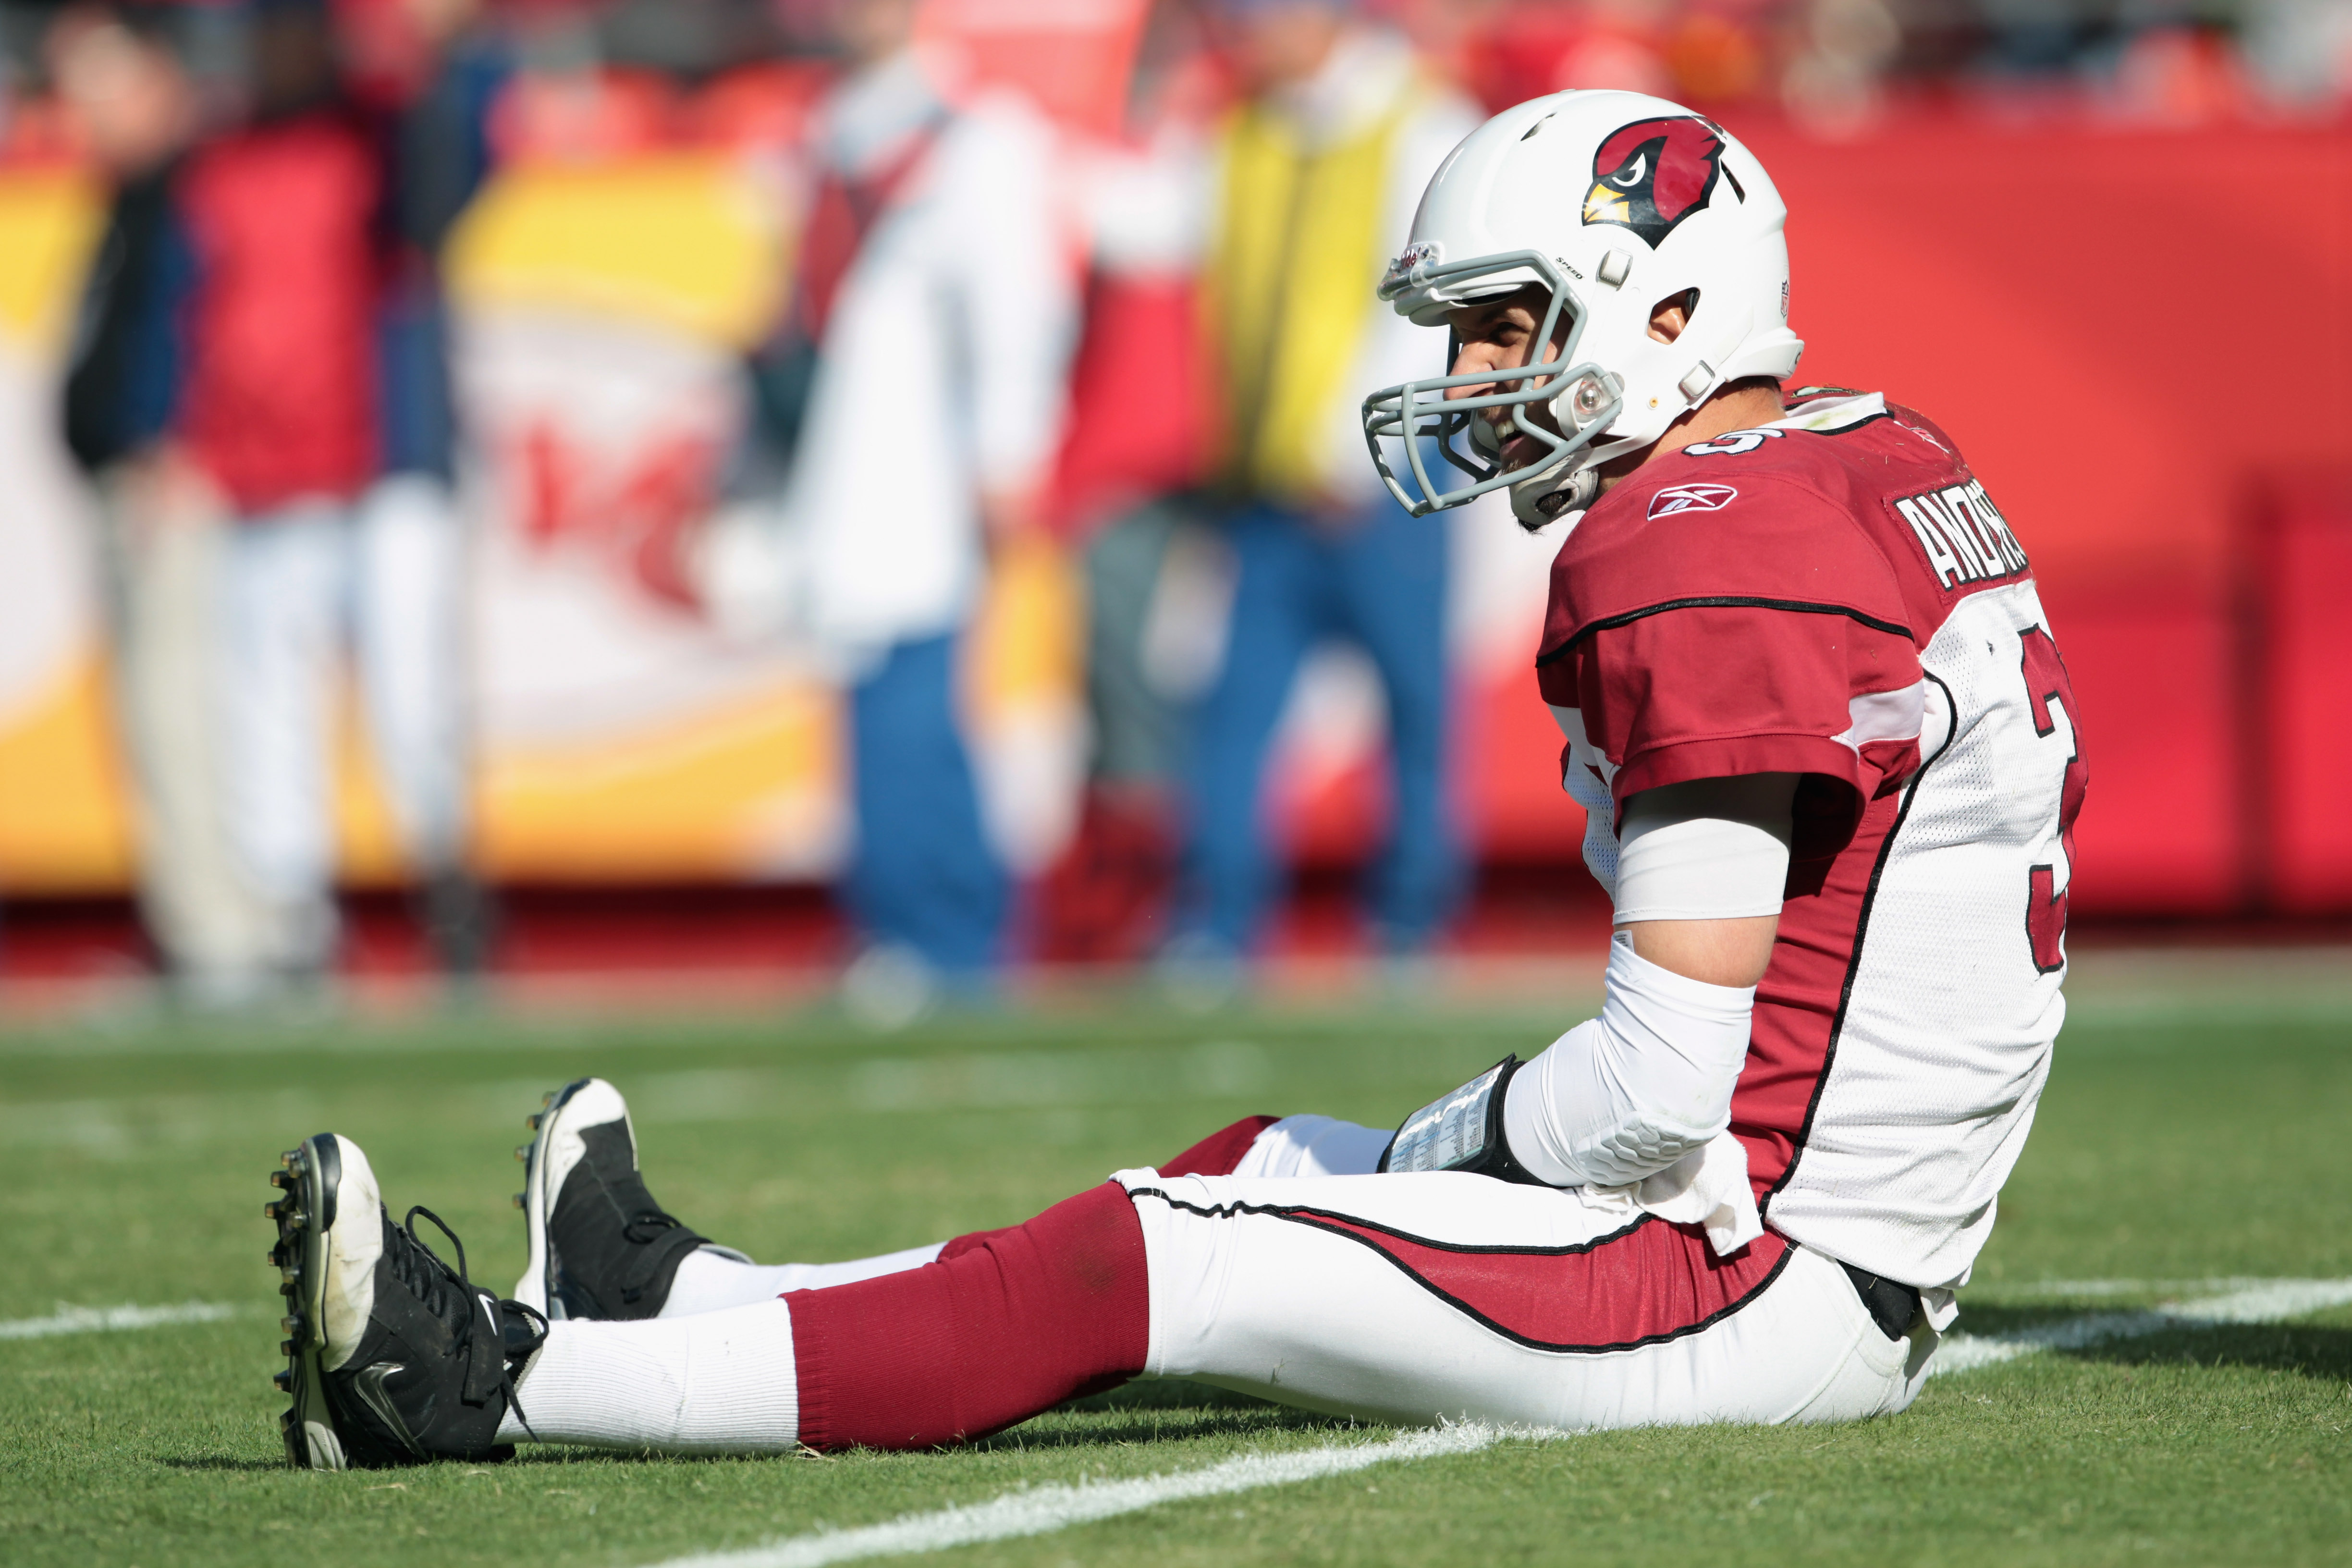 KANSAS CITY, MO - NOVEMBER 21:  Quarterback Derek Anderson #3 of the Arizona Cardinals sits on the field after failing to make a first down during the game against the Kansas City Chiefs on November 21, 2010  at Arrowhead Stadium in Kansas City, Missouri.